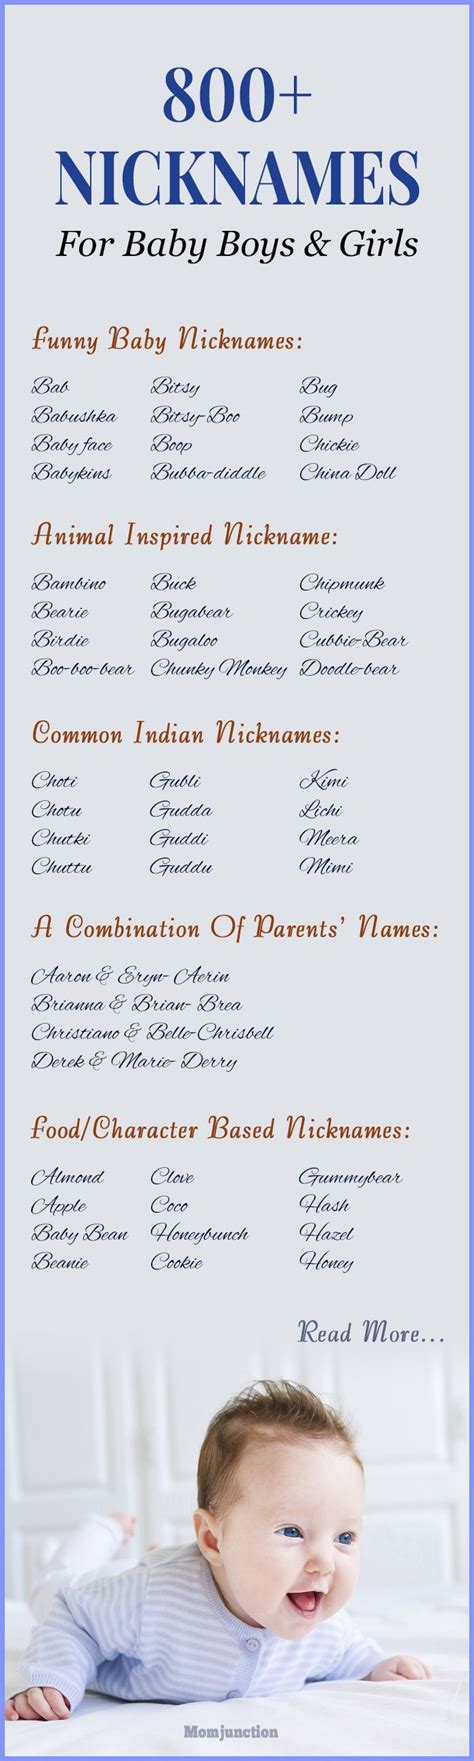 1000 Images About Baby Names On Pinterest Popular Baby Girl Names